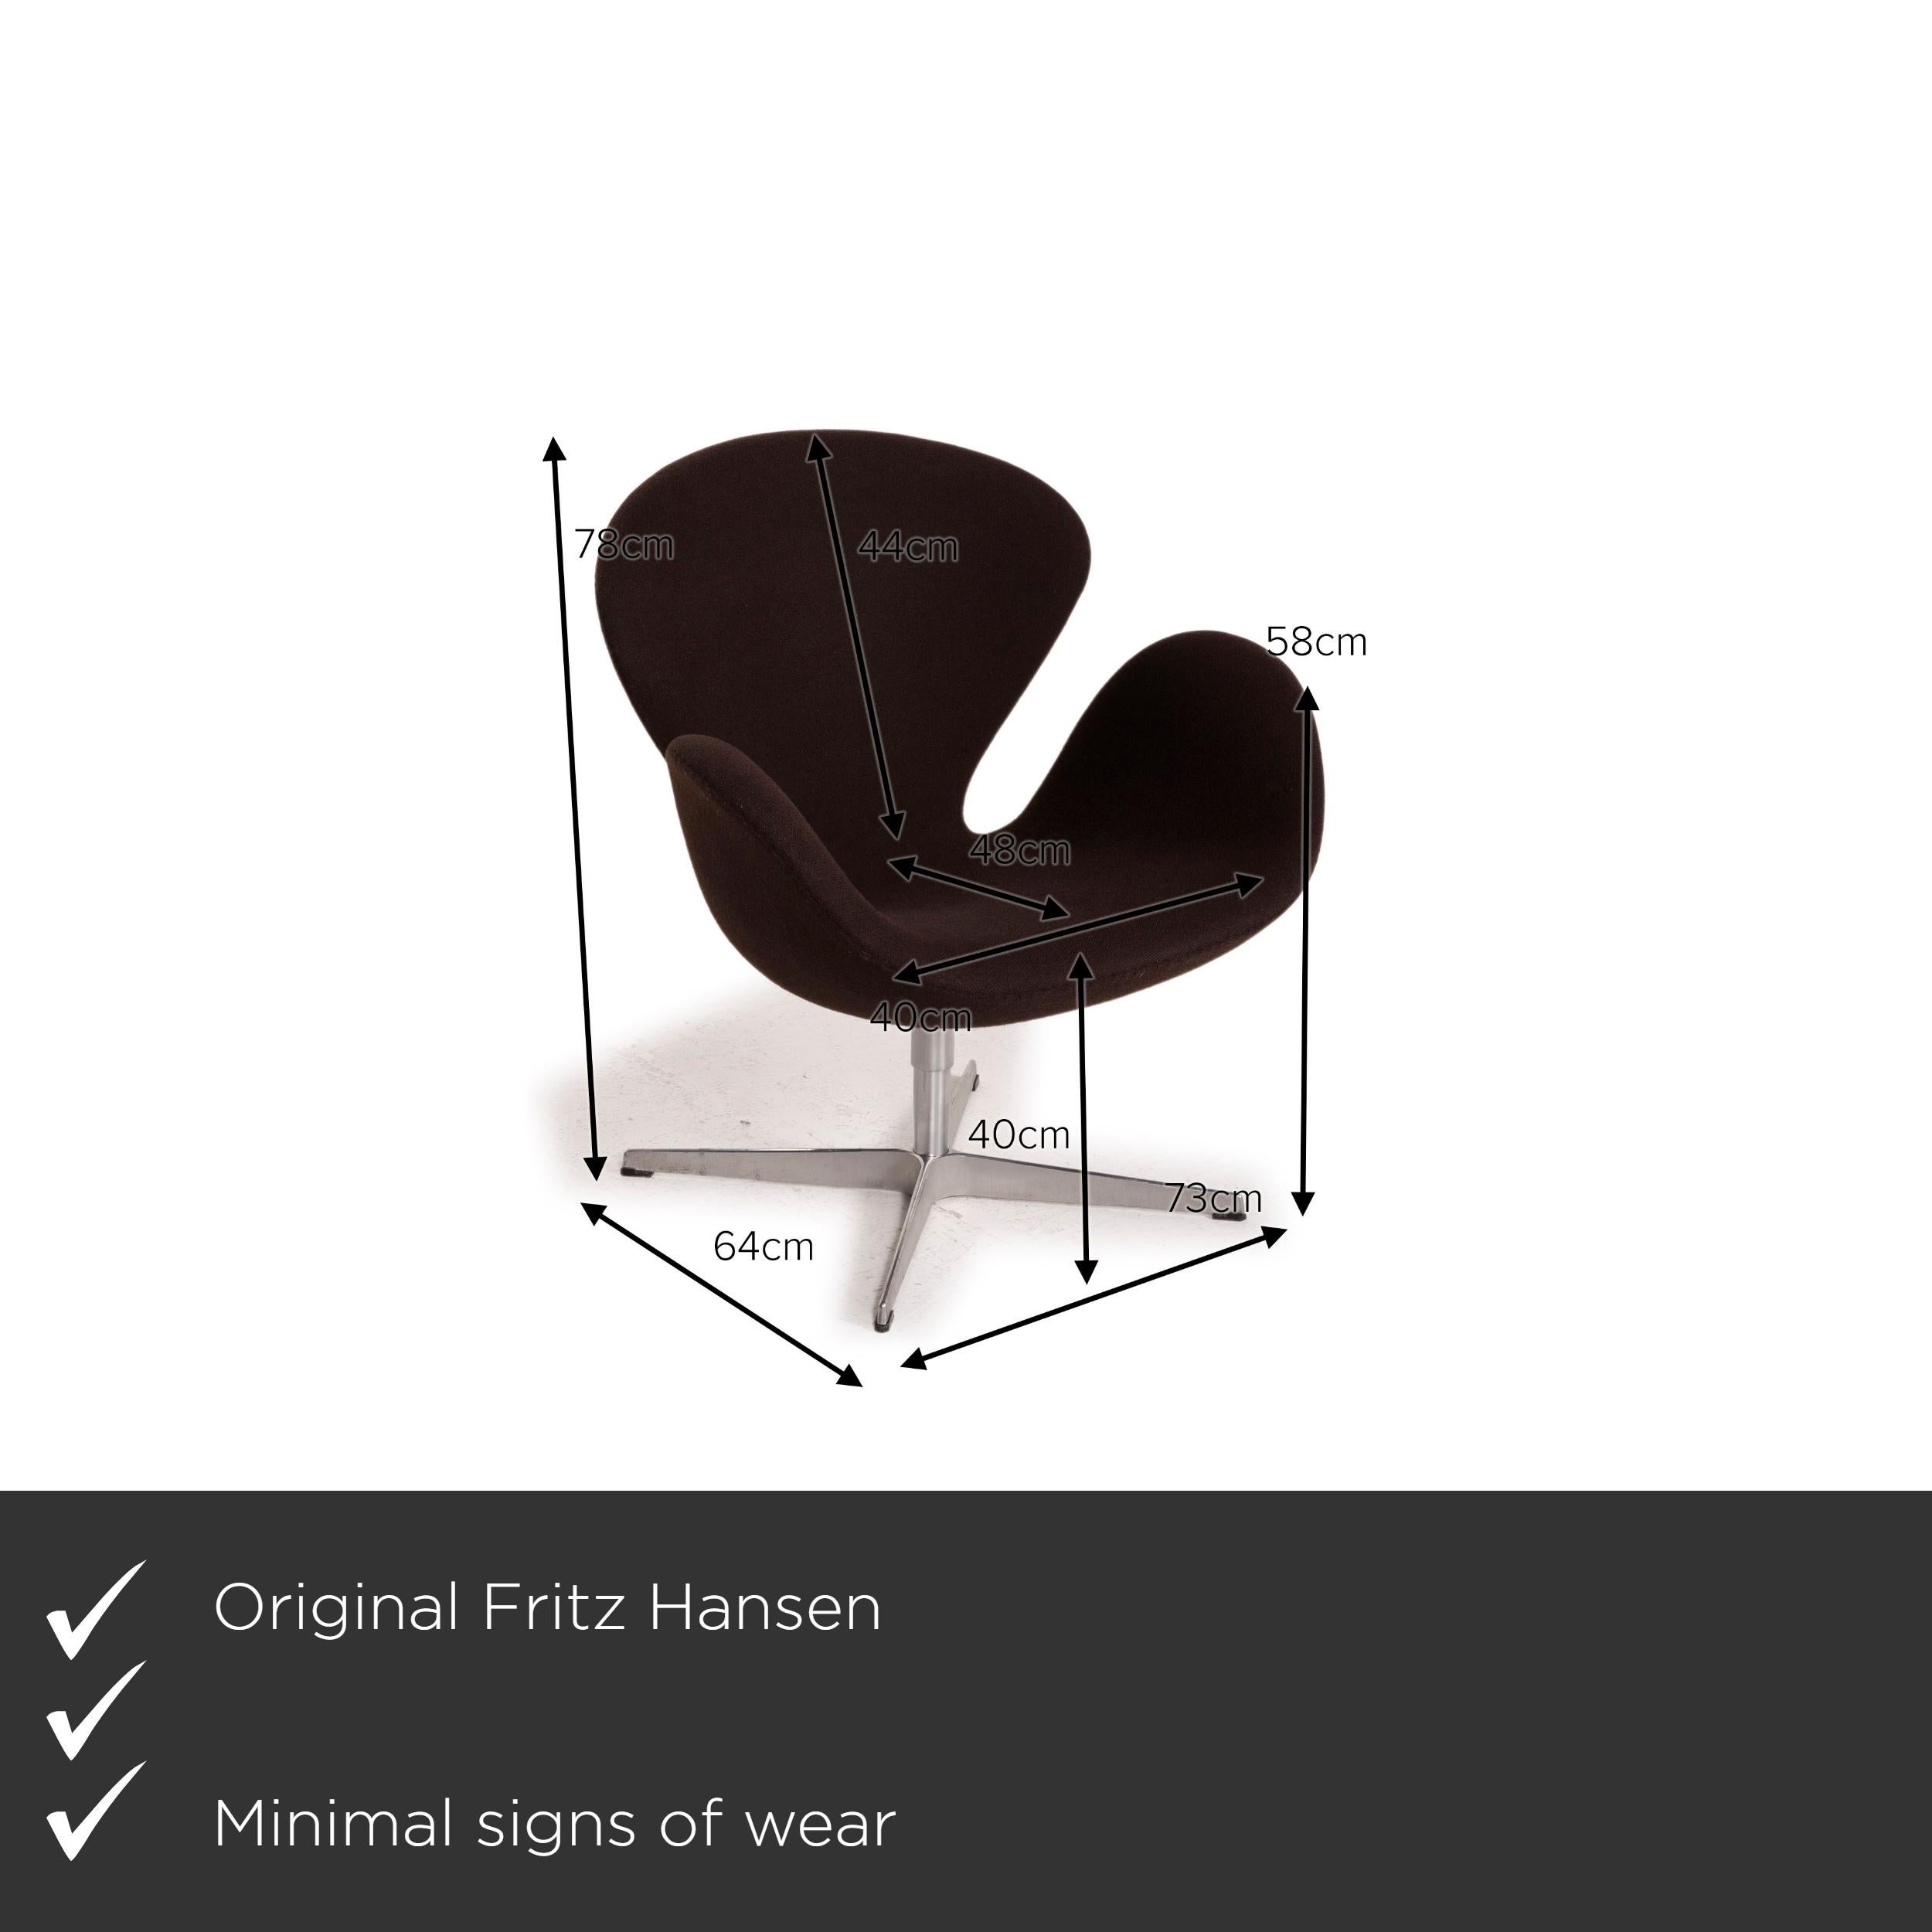 We present to you a Fritz Hansen Swan fabric armchair brown.
 
 

 Product measurements in centimeters:
 

Depth 64
Width 73
Height 78
Seat height 40
Rest height 58
Seat depth 48
Seat width 40
Back height 44.